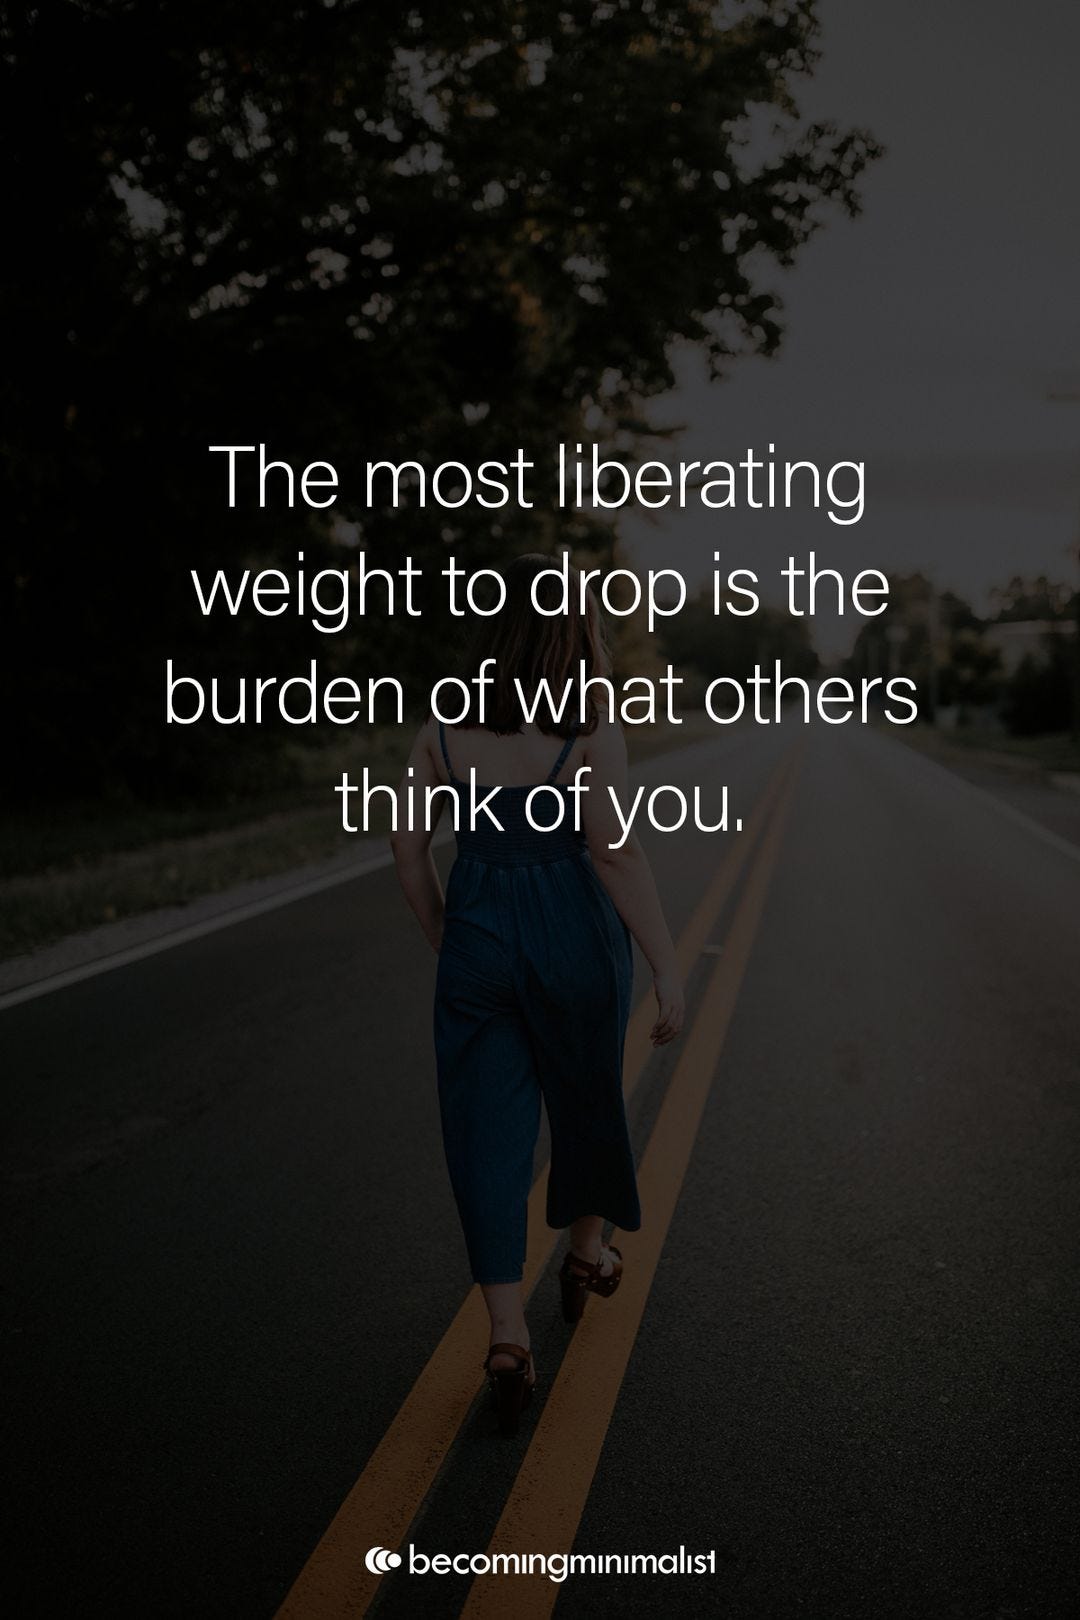 May be an image of 1 person, road and text that says "The most liberating weight to drop is the burden of what others think of you. becomıngmınımalıst"